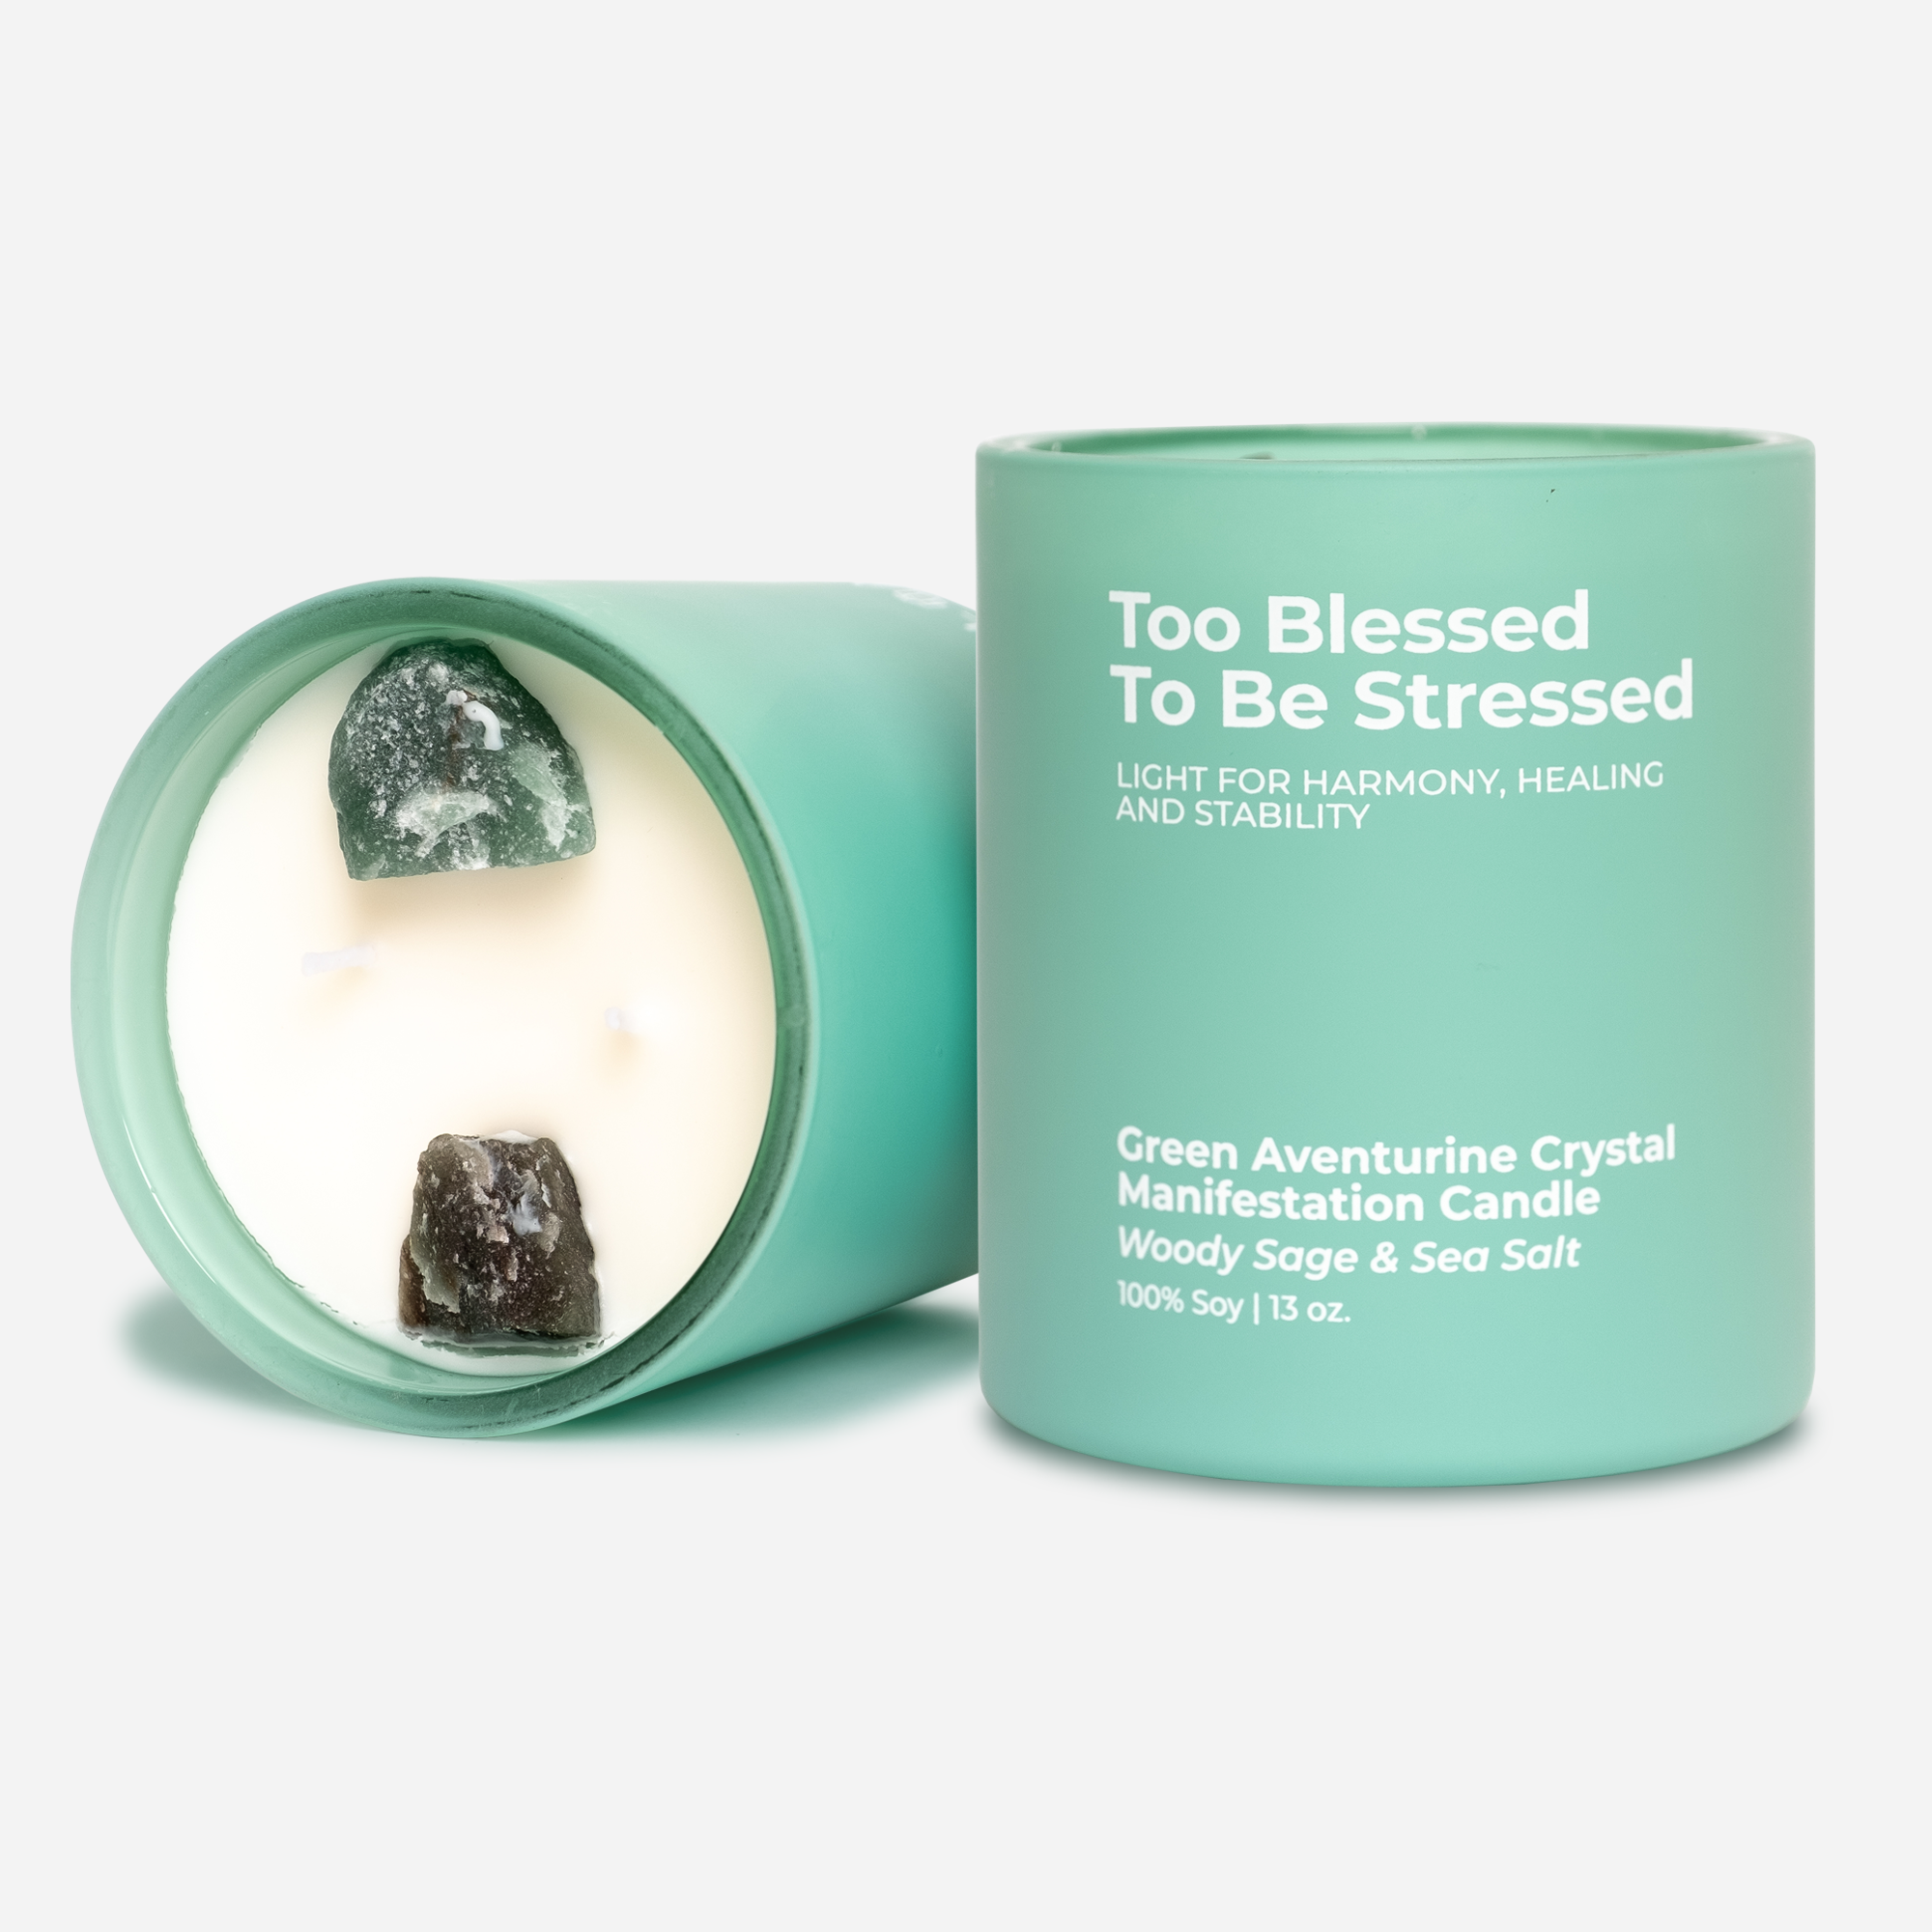 Too Blessed To Be Stressed - Green Aventurine Crystal Manifestation Candle